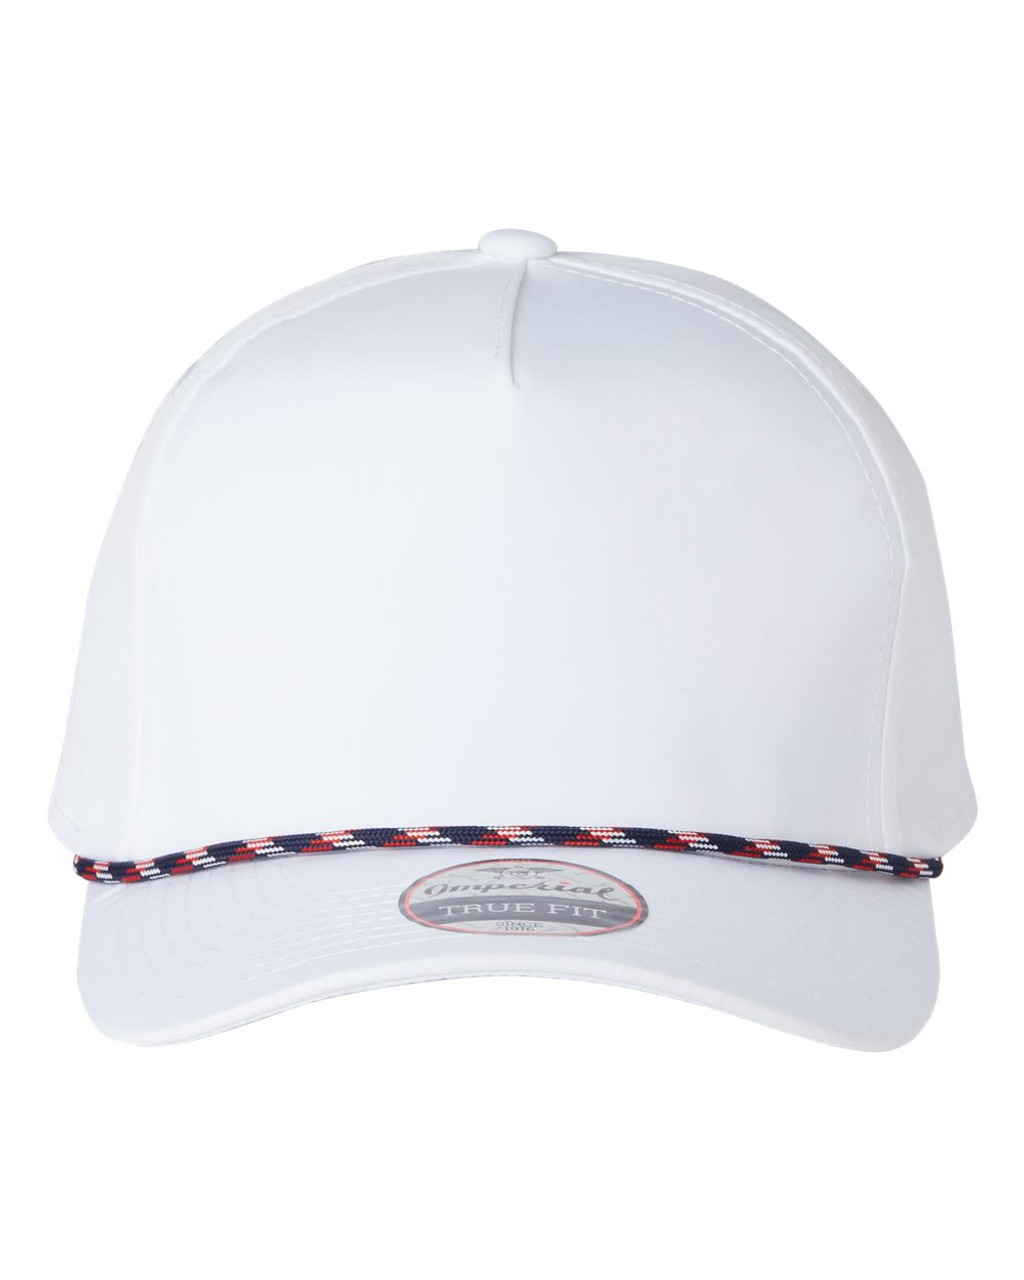 Imperial - The Wrightson Cap - 5054 White/Navy-Red